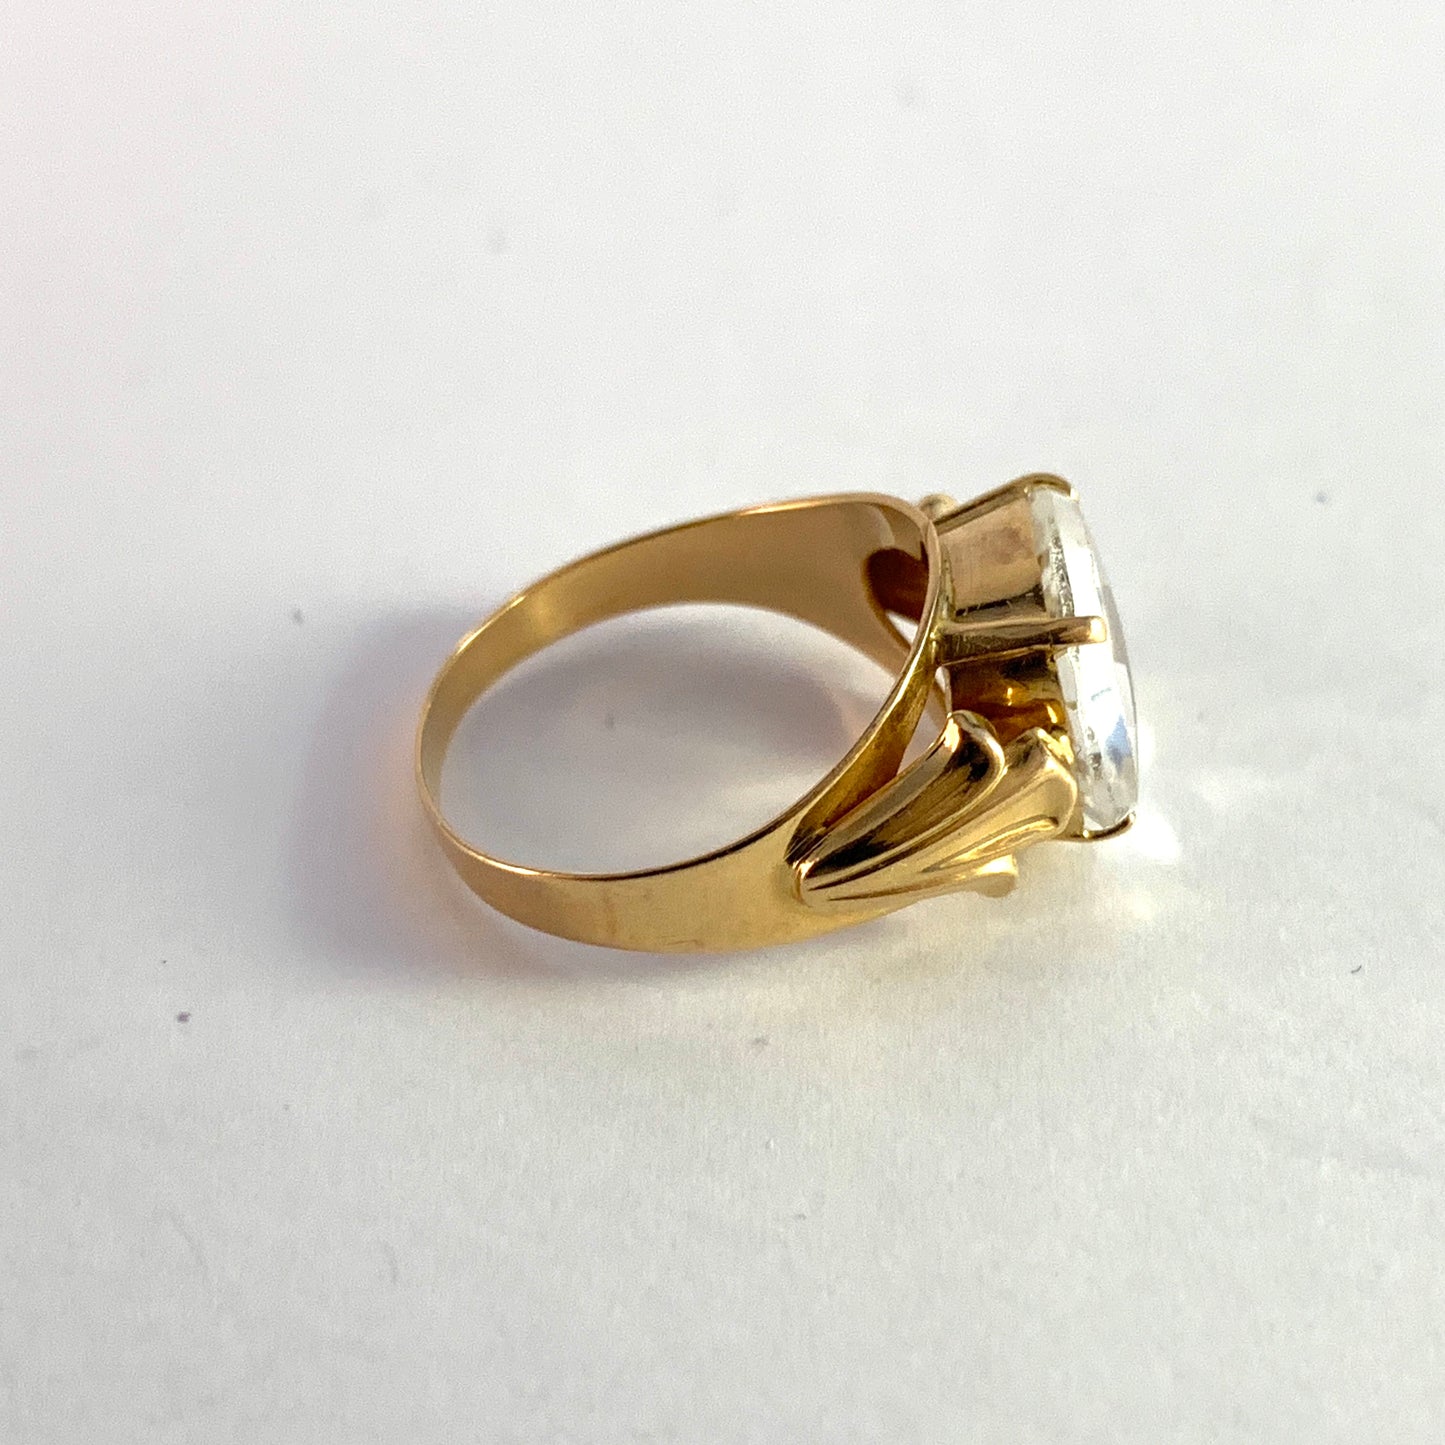 Ceson, Sweden 1957. Mid Century 18k Gold Synthetic Spinel Ring.